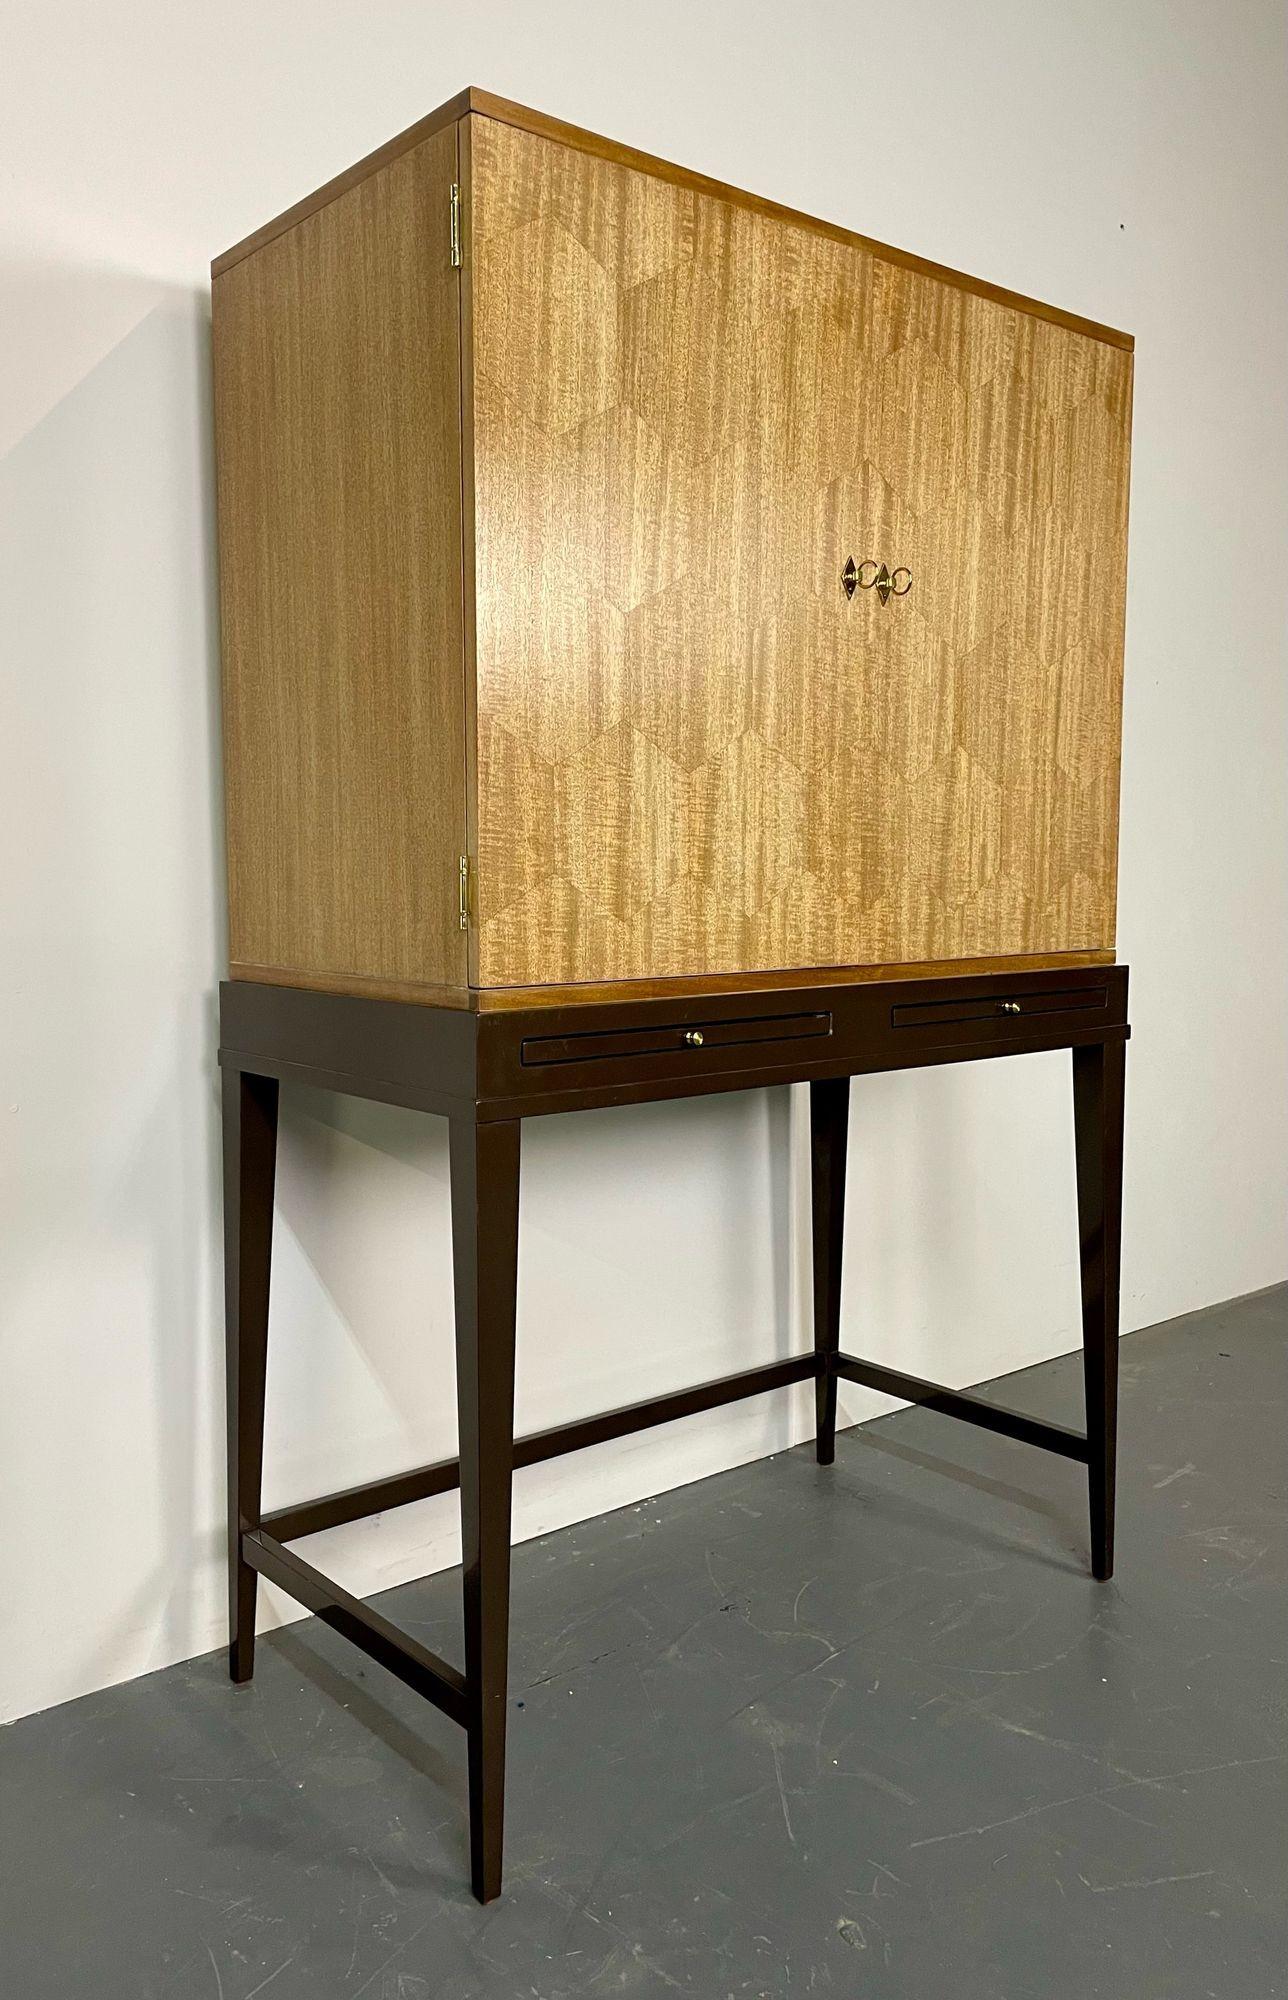 Mid-Century Modern style bar cabinet on stand, lacquer, metal, brass.
A sleek and stunning bar having a high console metal base supporting and a wonderfully constructed double door bar or vitrine cabinet. The lighted interior with mirror back has